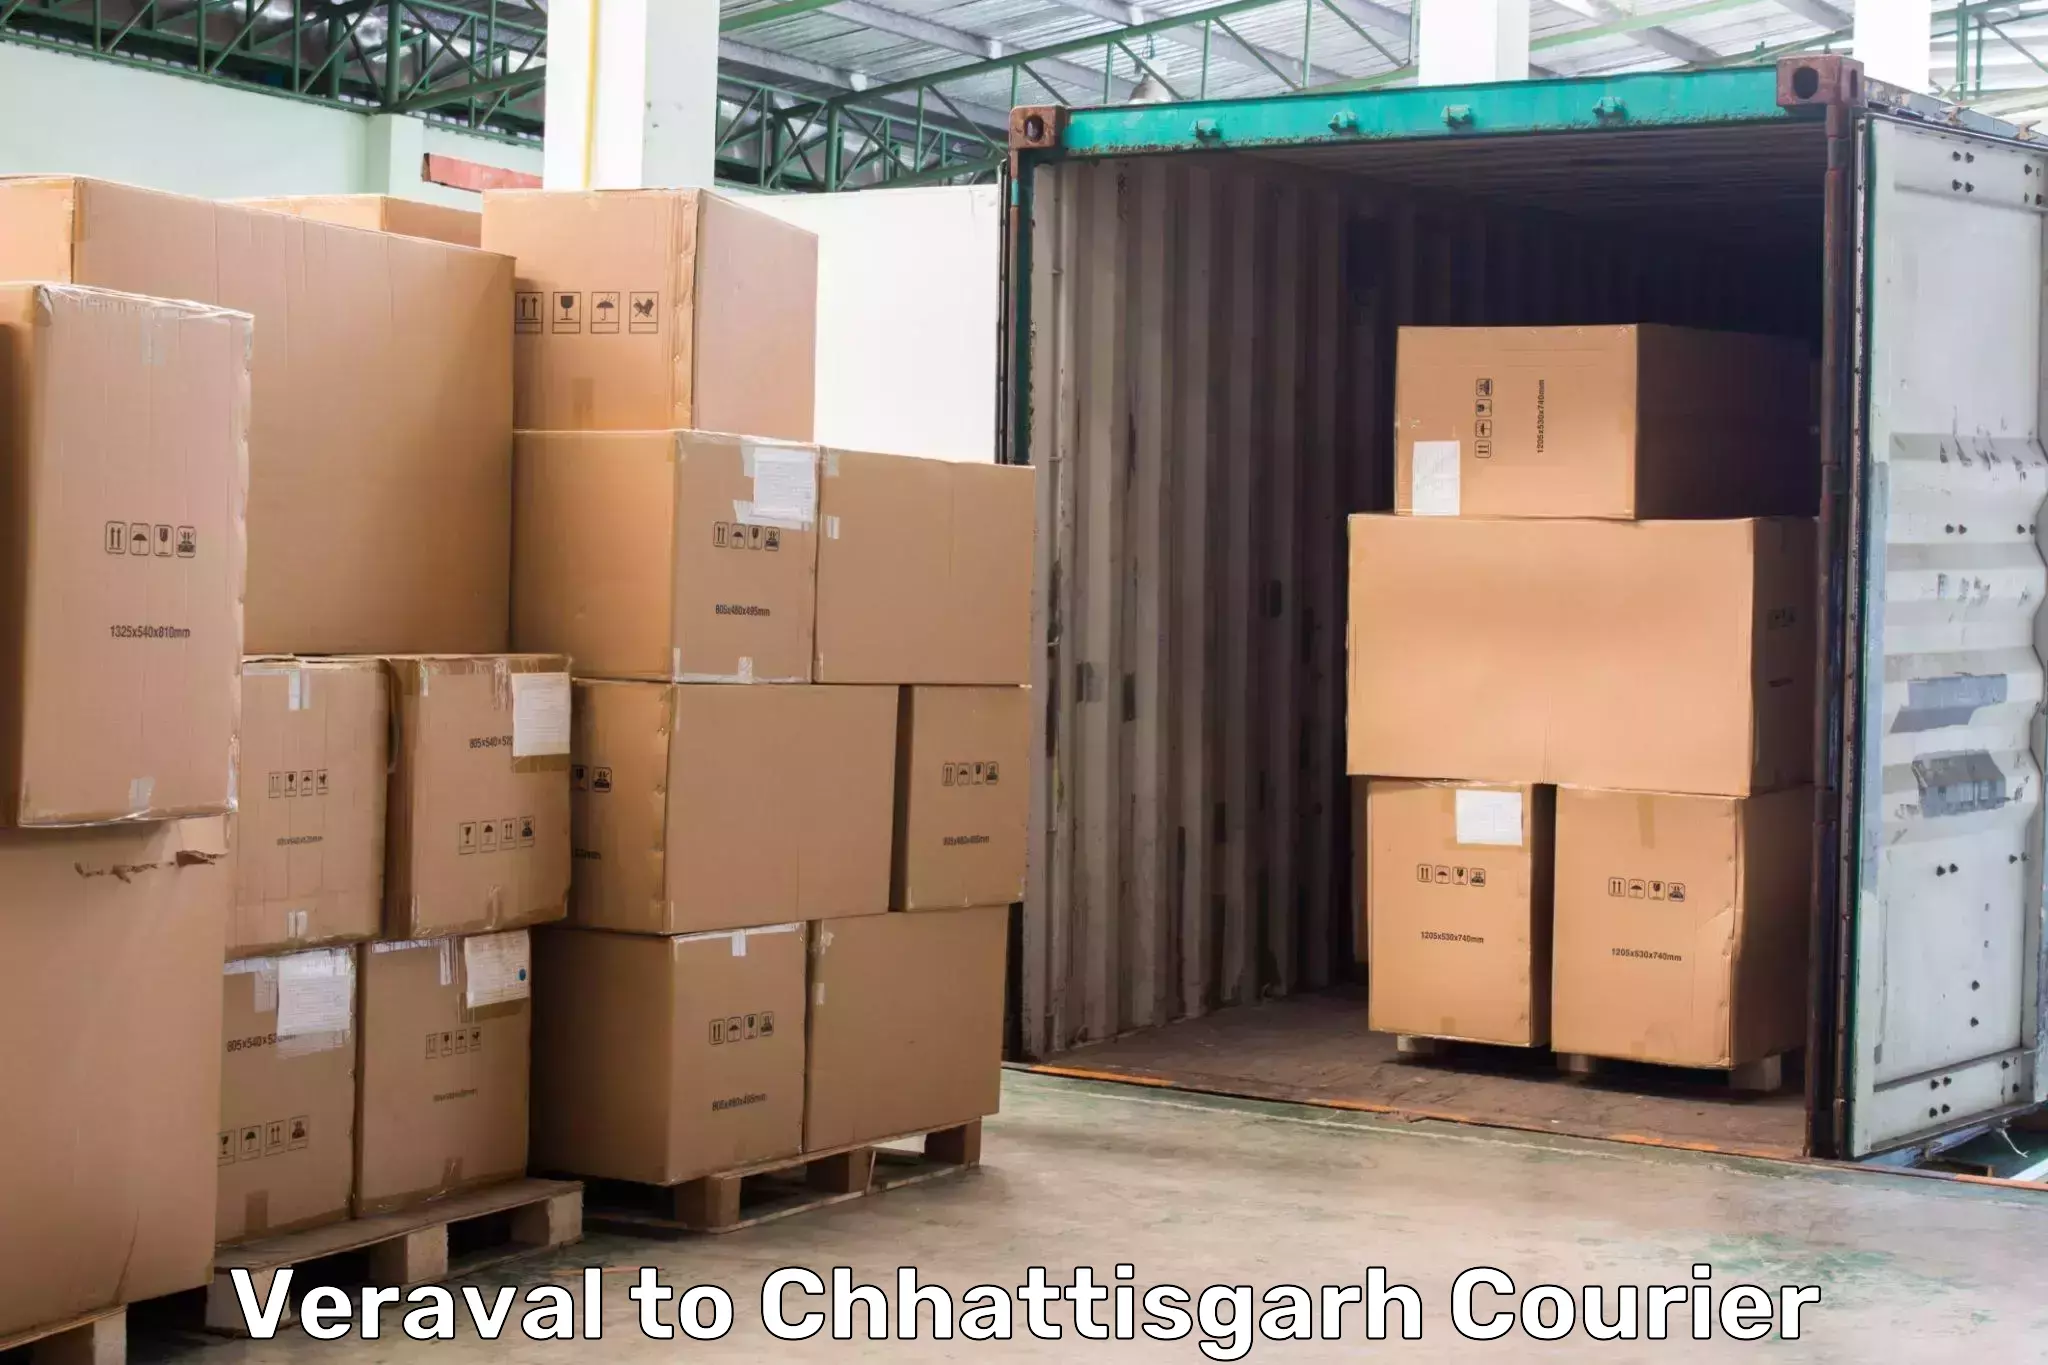 Express delivery capabilities Veraval to Khairagarh